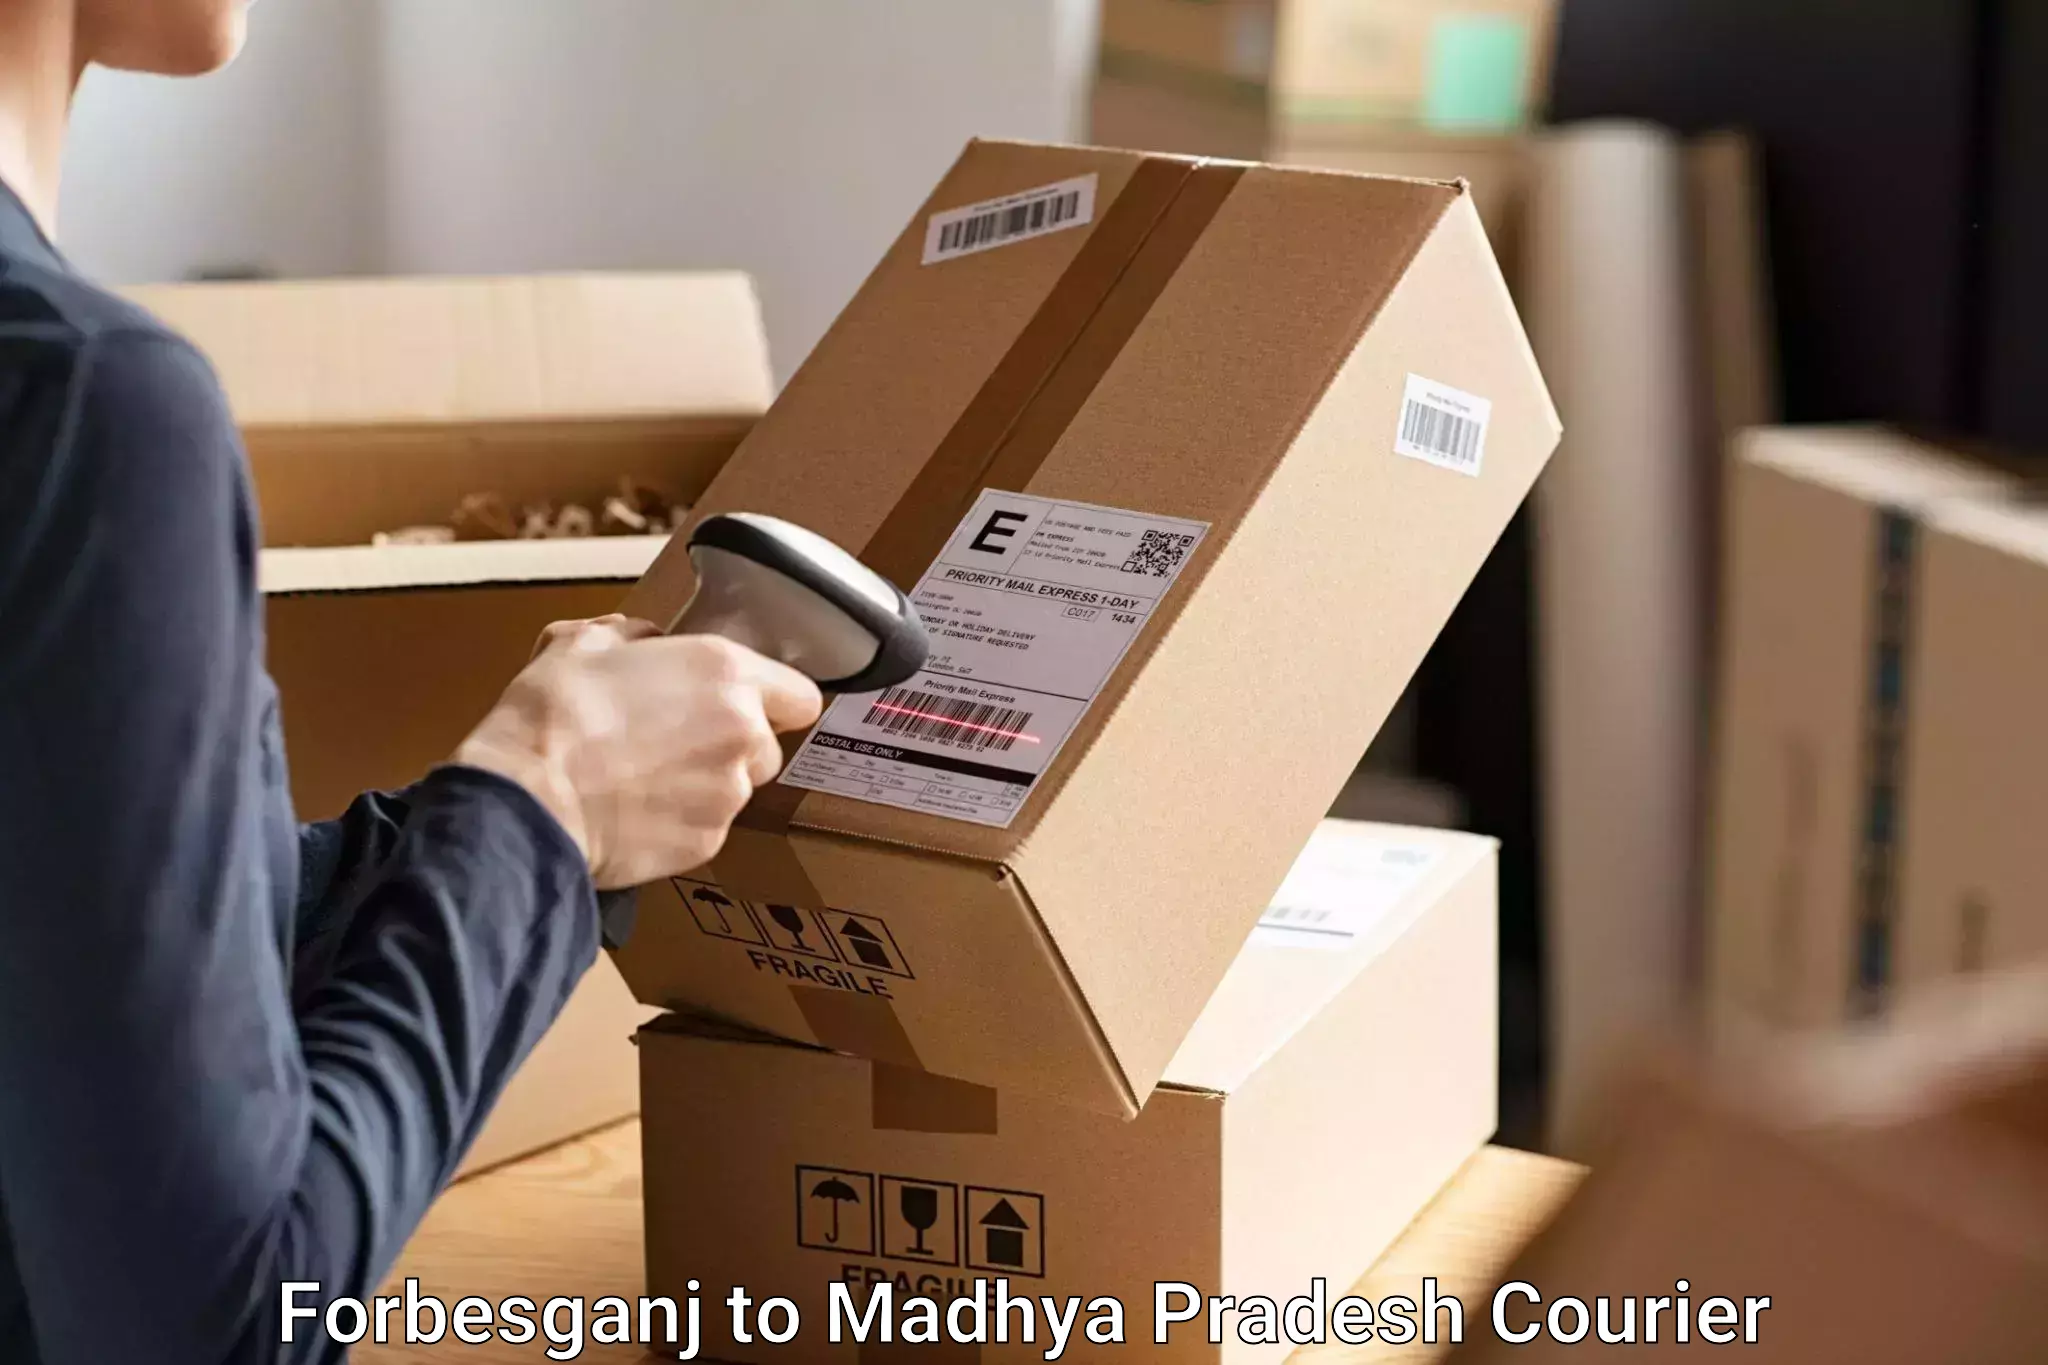 Baggage shipping service Forbesganj to IIT Indore